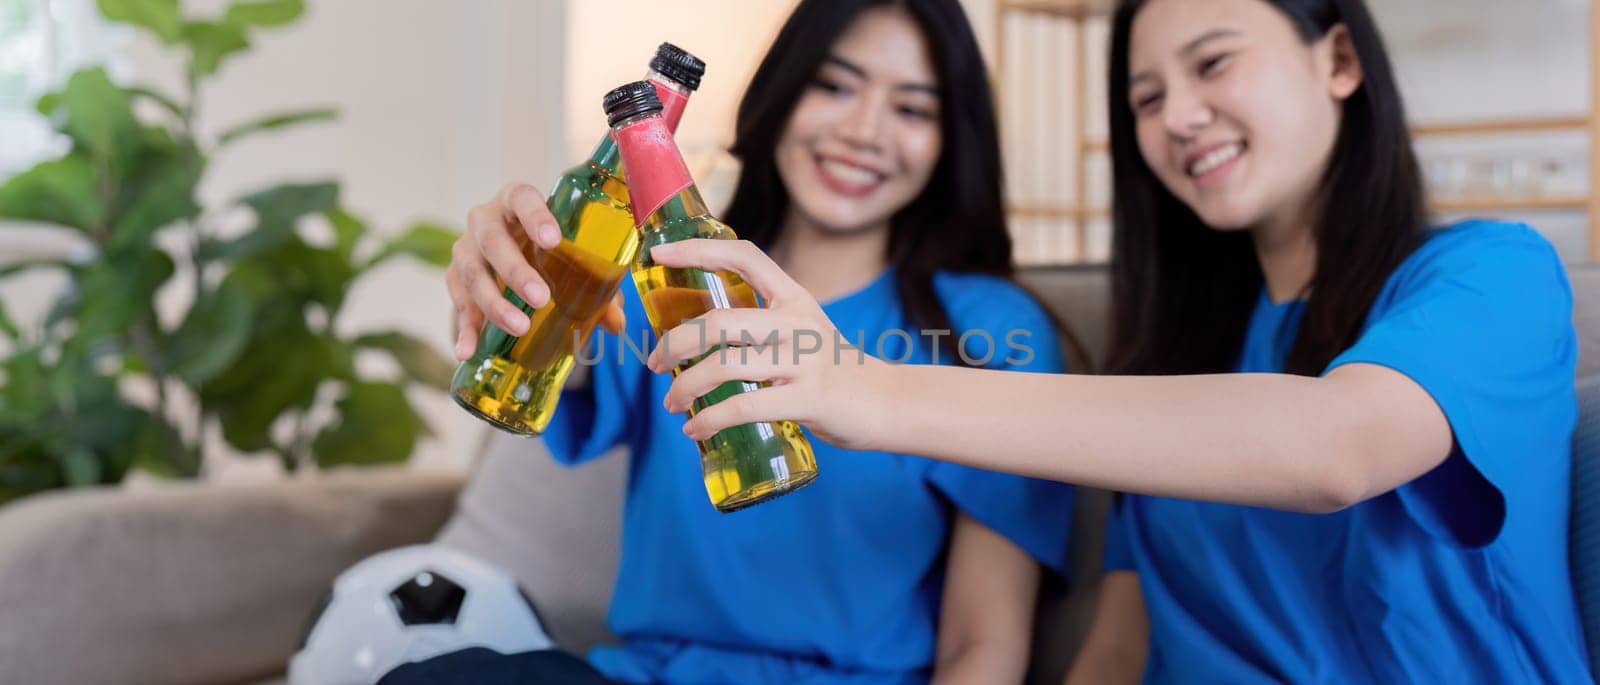 Lesbian couple cheering and toasting for Euro football at home with drinks. Concept of LGBTQ pride, sports enthusiasm, and celebration.